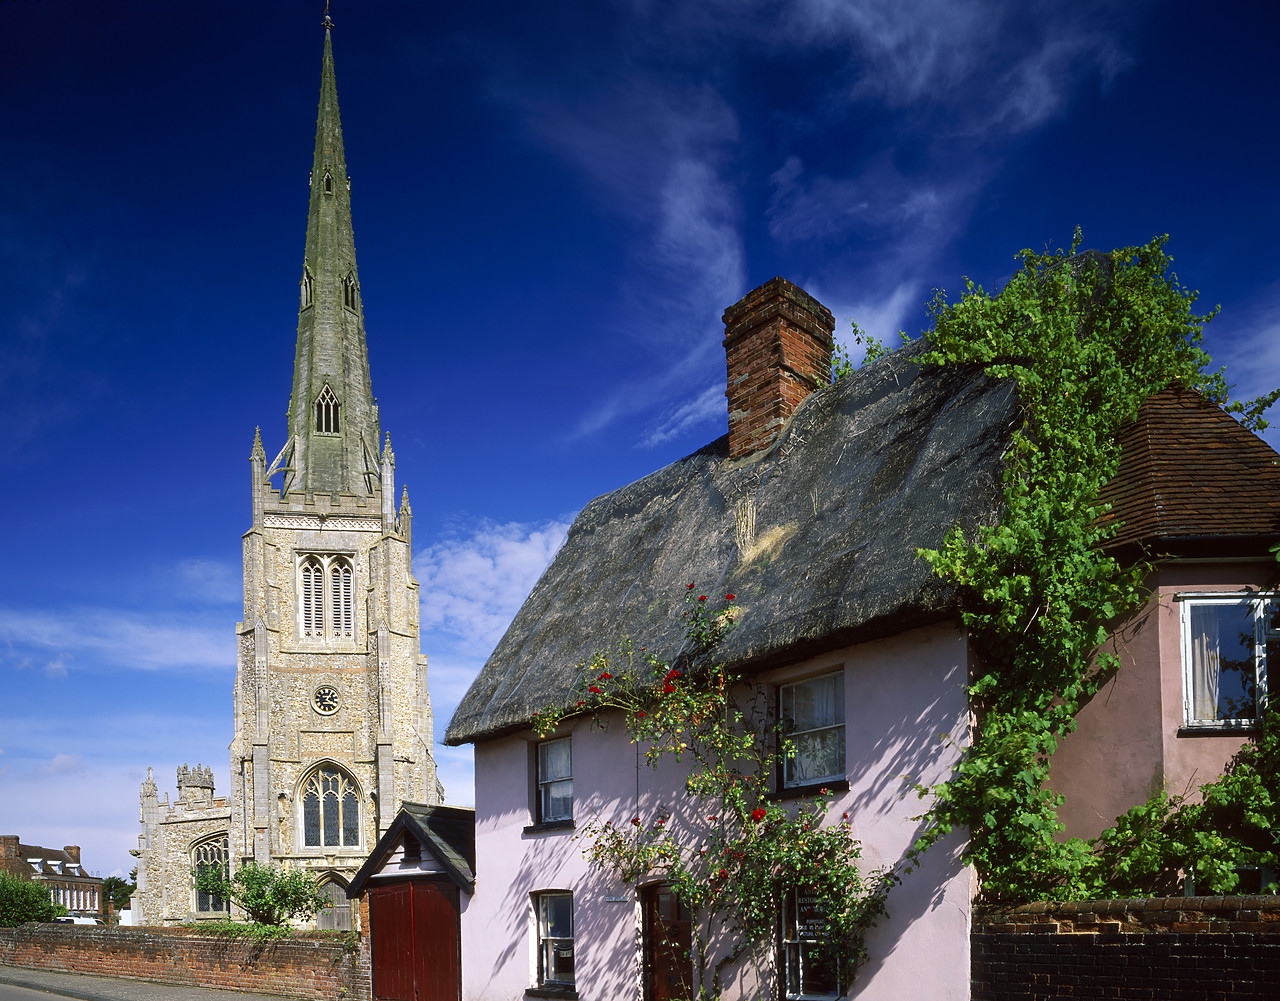 #200068-2 - Church & Cottage, Thaxted, Essex, England